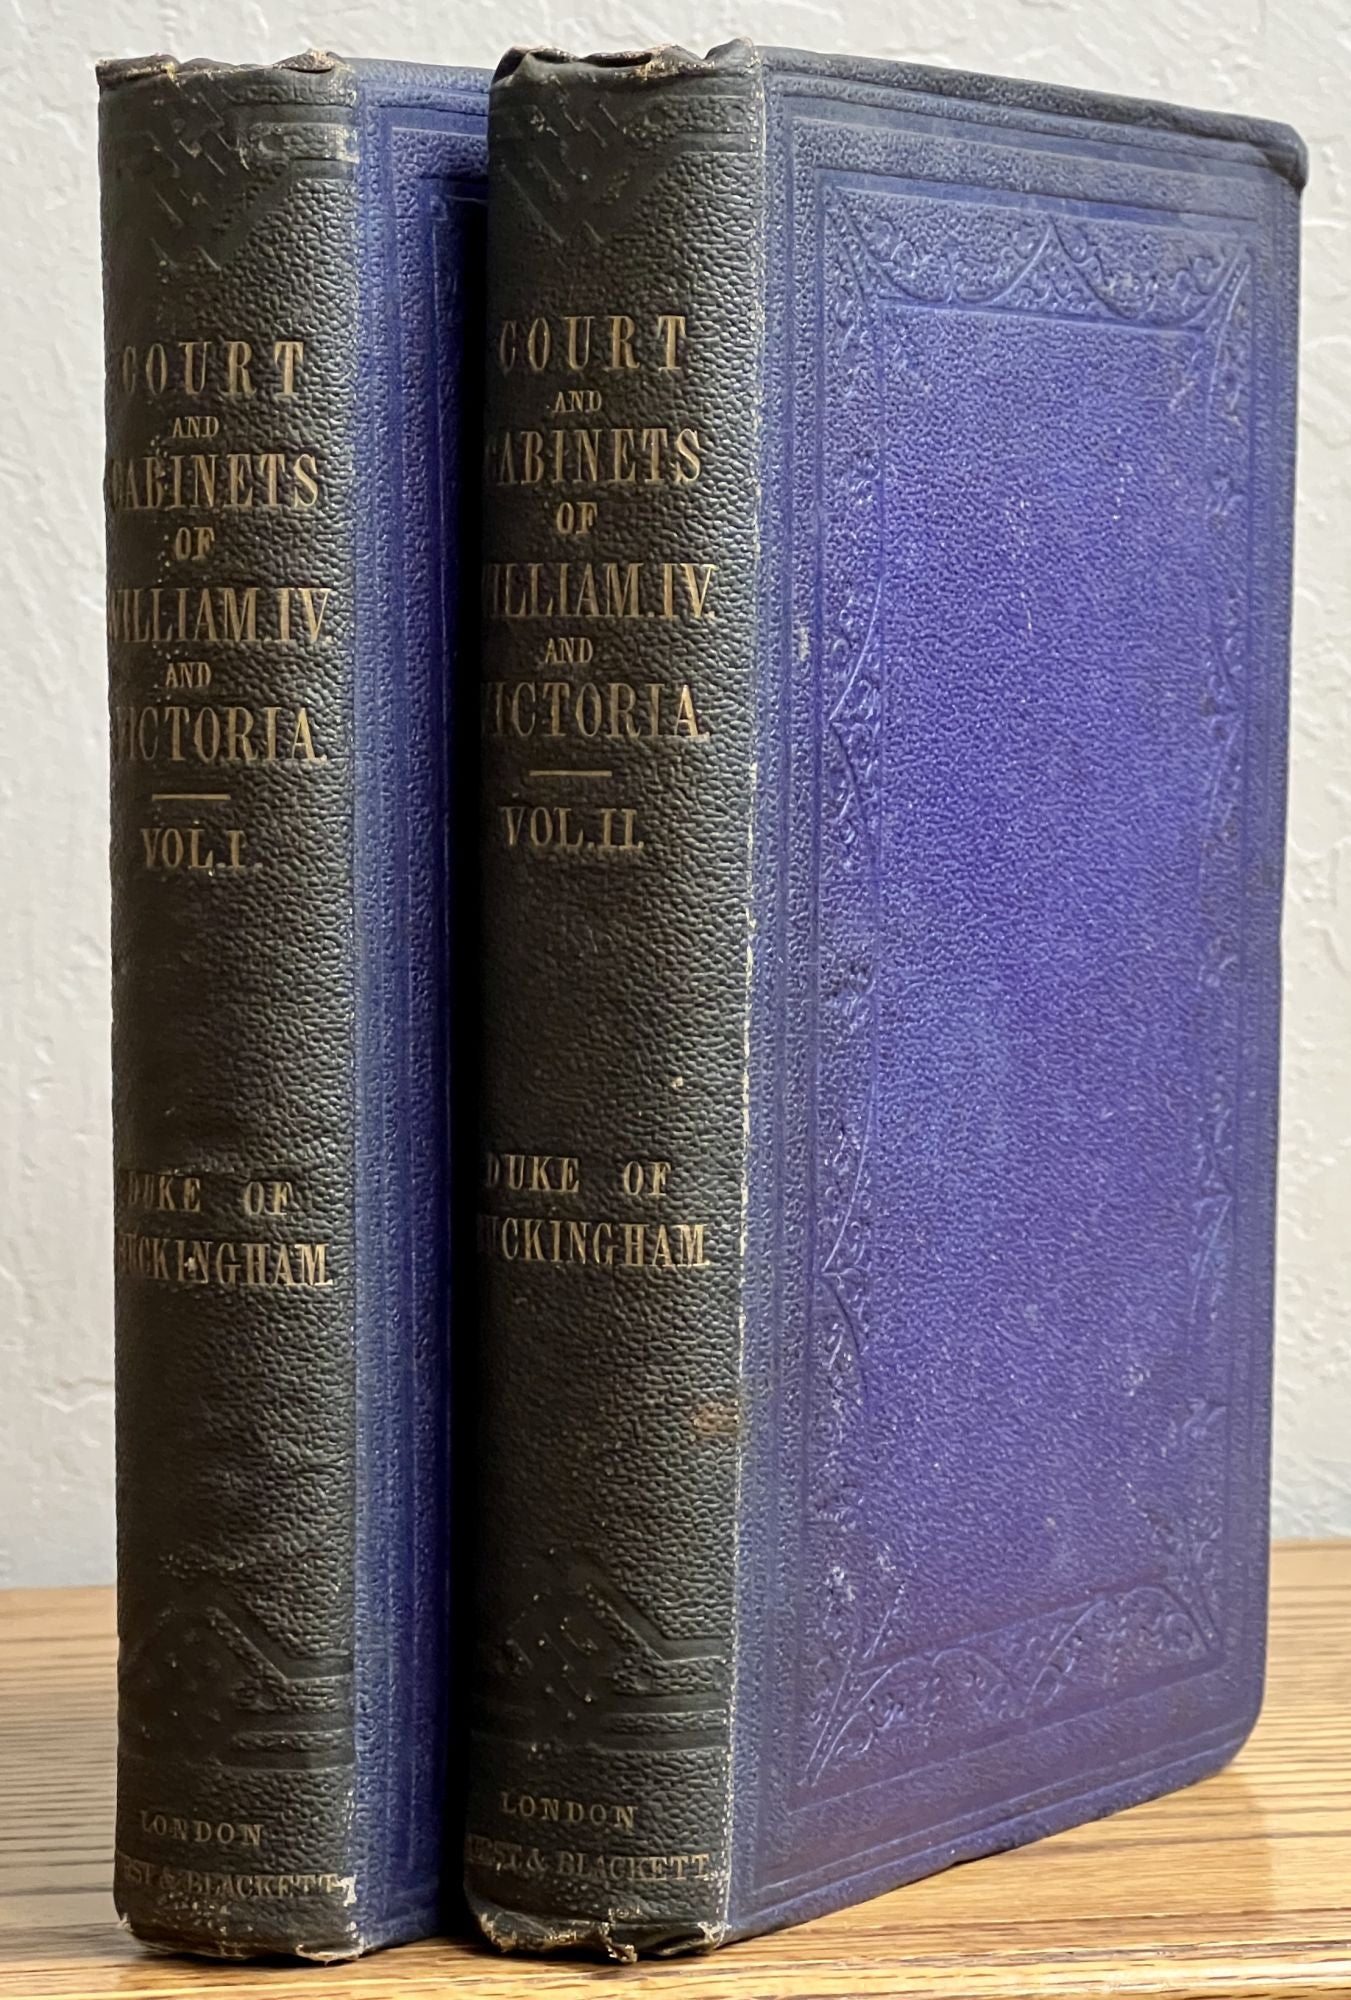 Duke of Buckingham and Chandos [Richard Plantagenet Temple Nugent Brydges Chandos Grenville. 1797 - 1861] - MEMOIRS Of The COURTS And CABINETS Of WILLIAM IV. And VICTORIA. From Original Family Documents